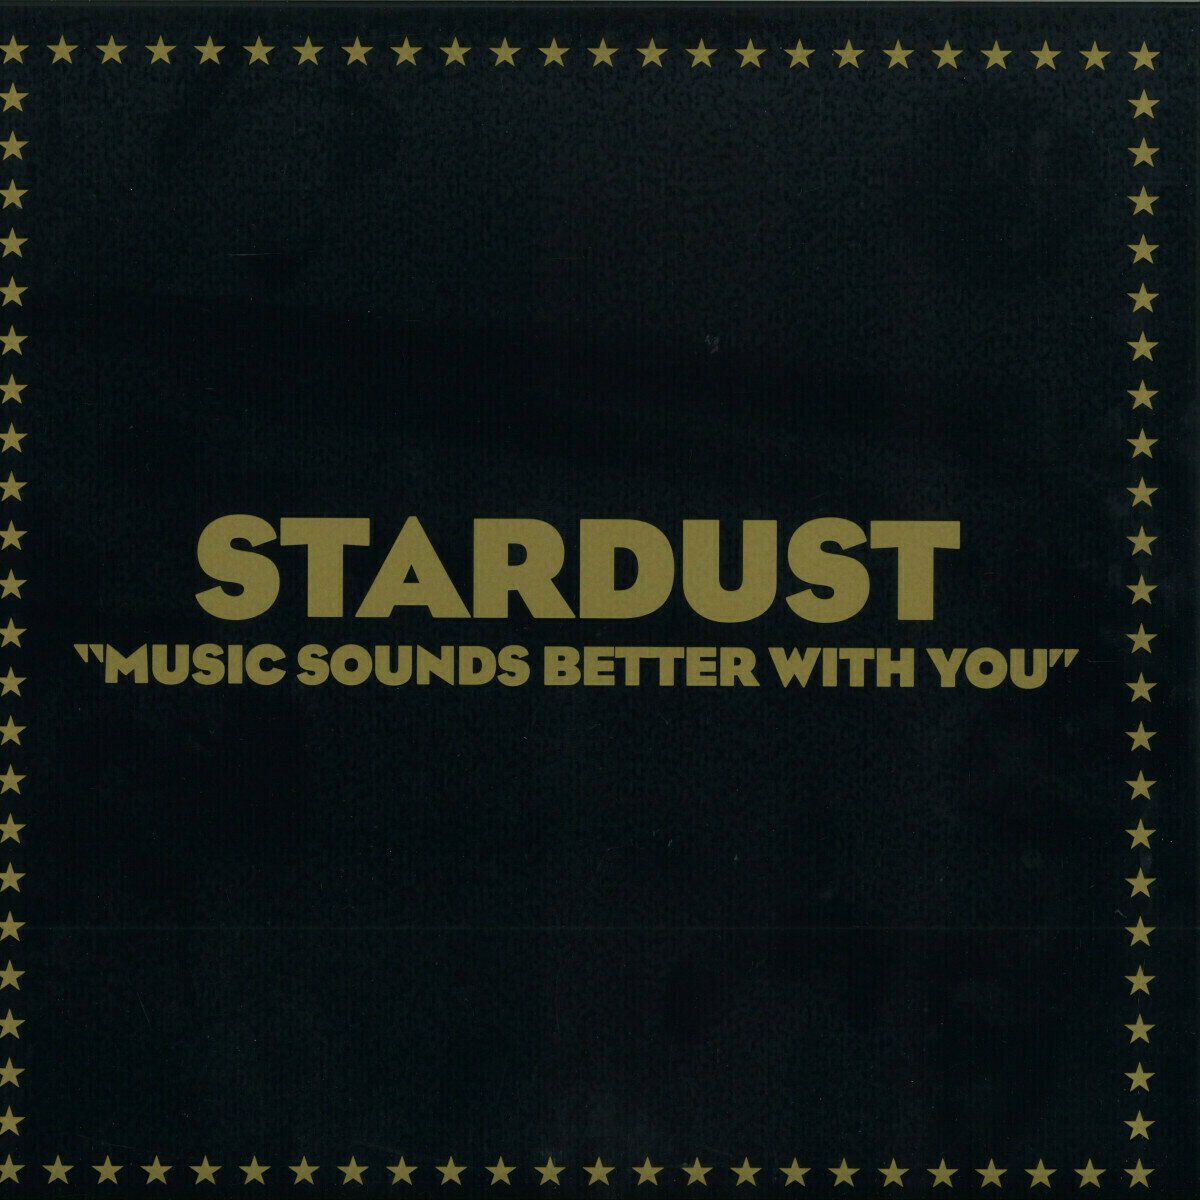 Vinyl Record Stardust - Music Sounds Better With You (12" Vinyl)